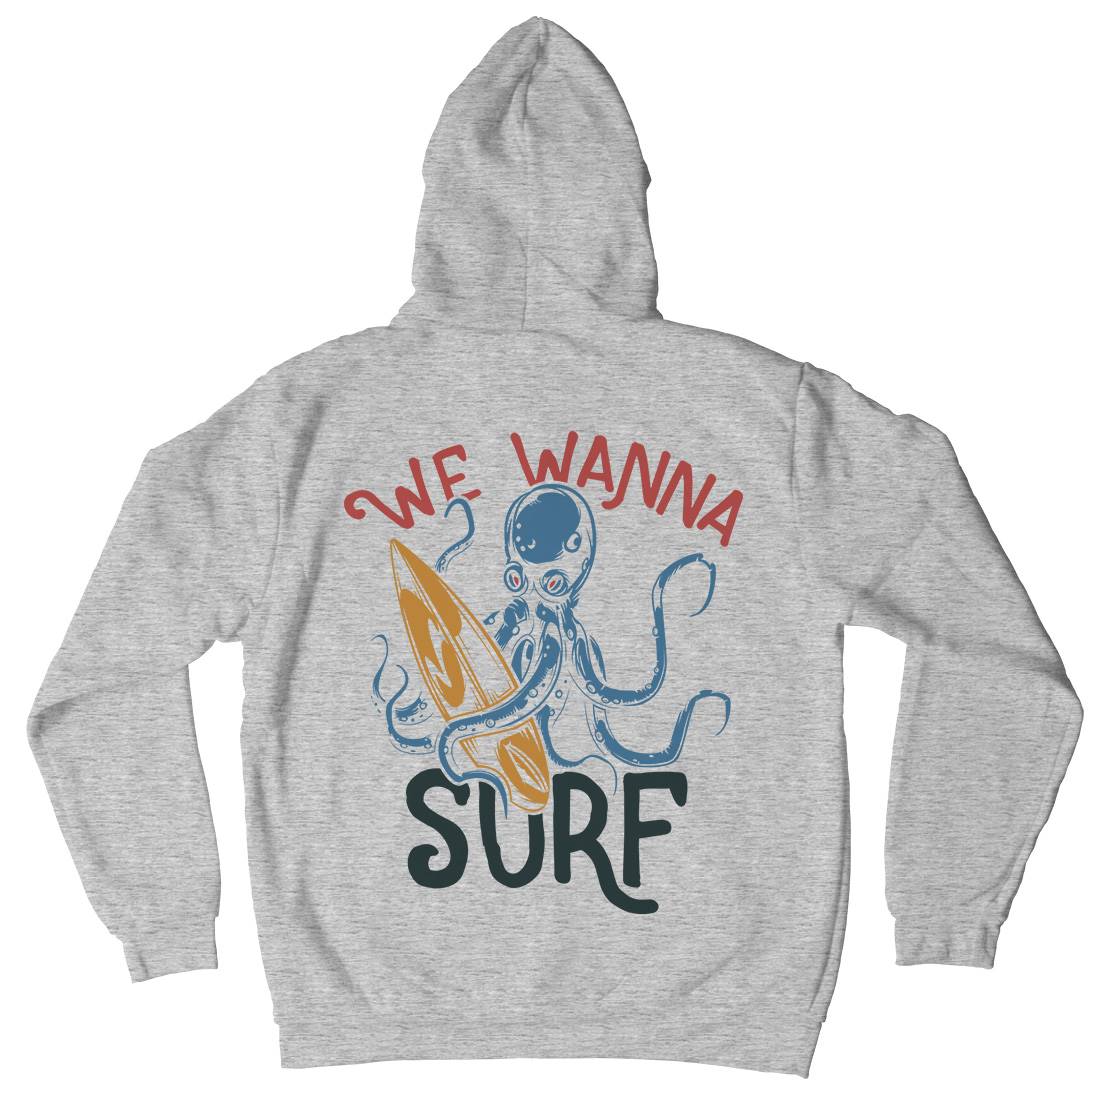 Octopus Surfing Mens Hoodie With Pocket Surf B347